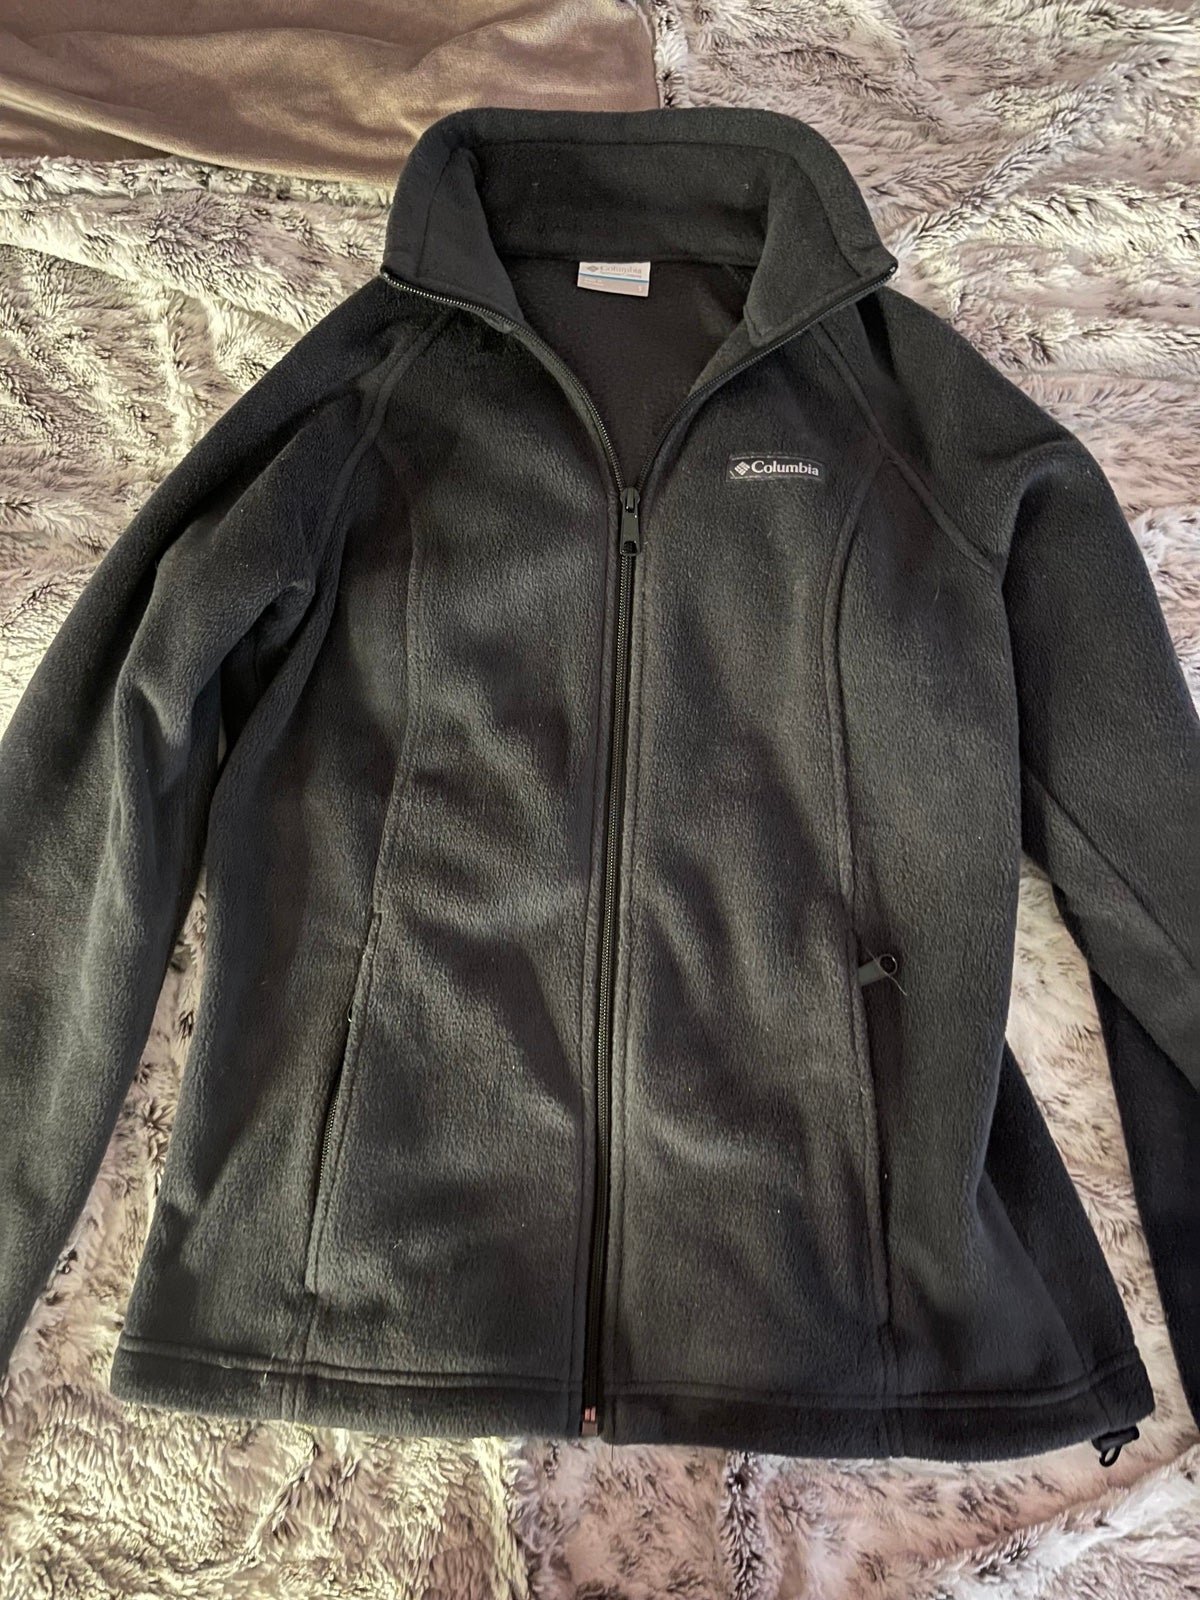 Amazing Columbia jacket owSY9x8Rs Hot Sale